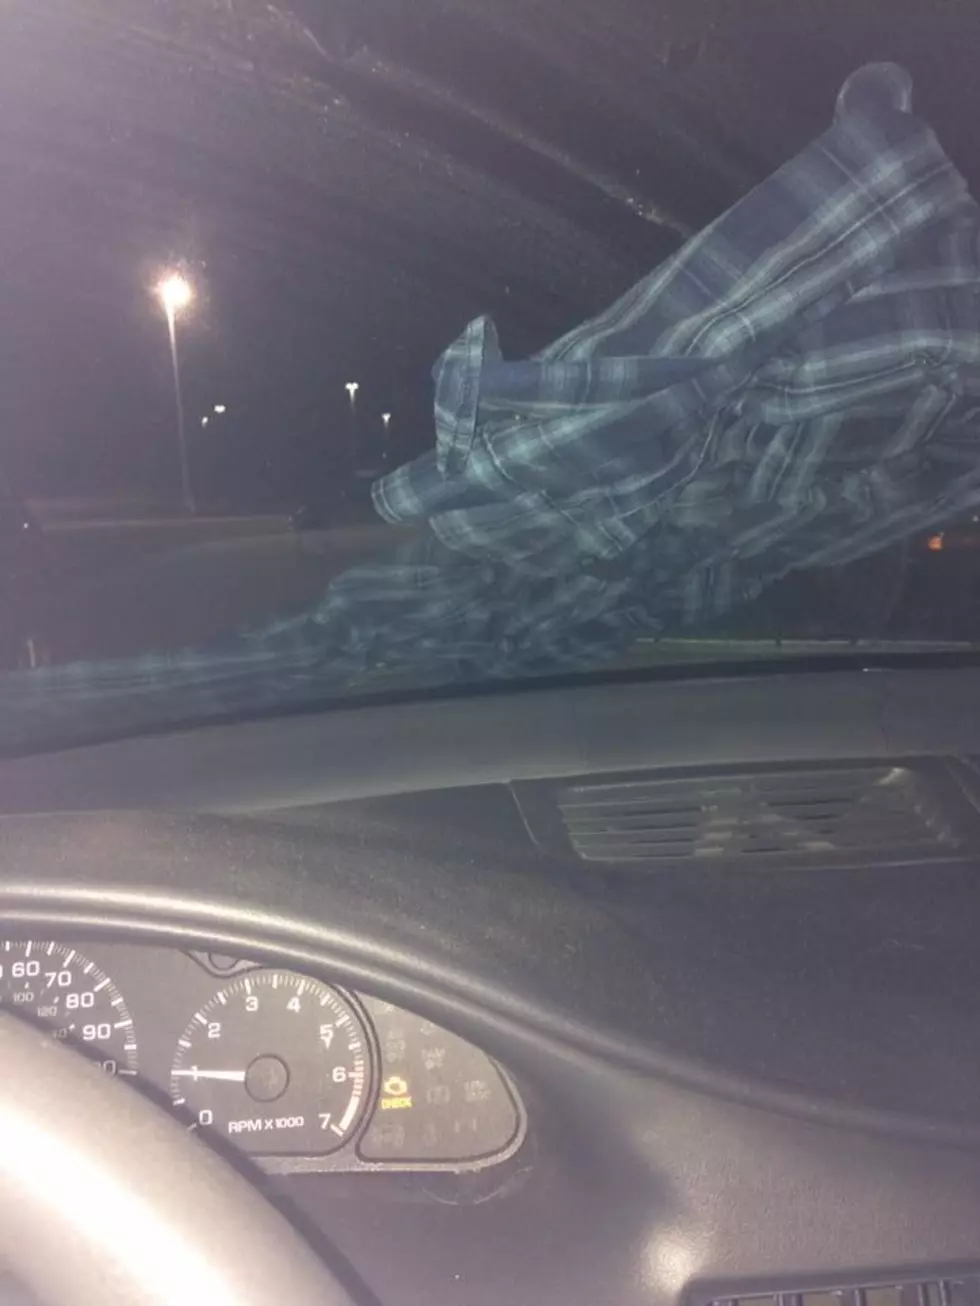 UPDATE: Police Report That The Shirt Found On The Windshield In Flint Was A Prank